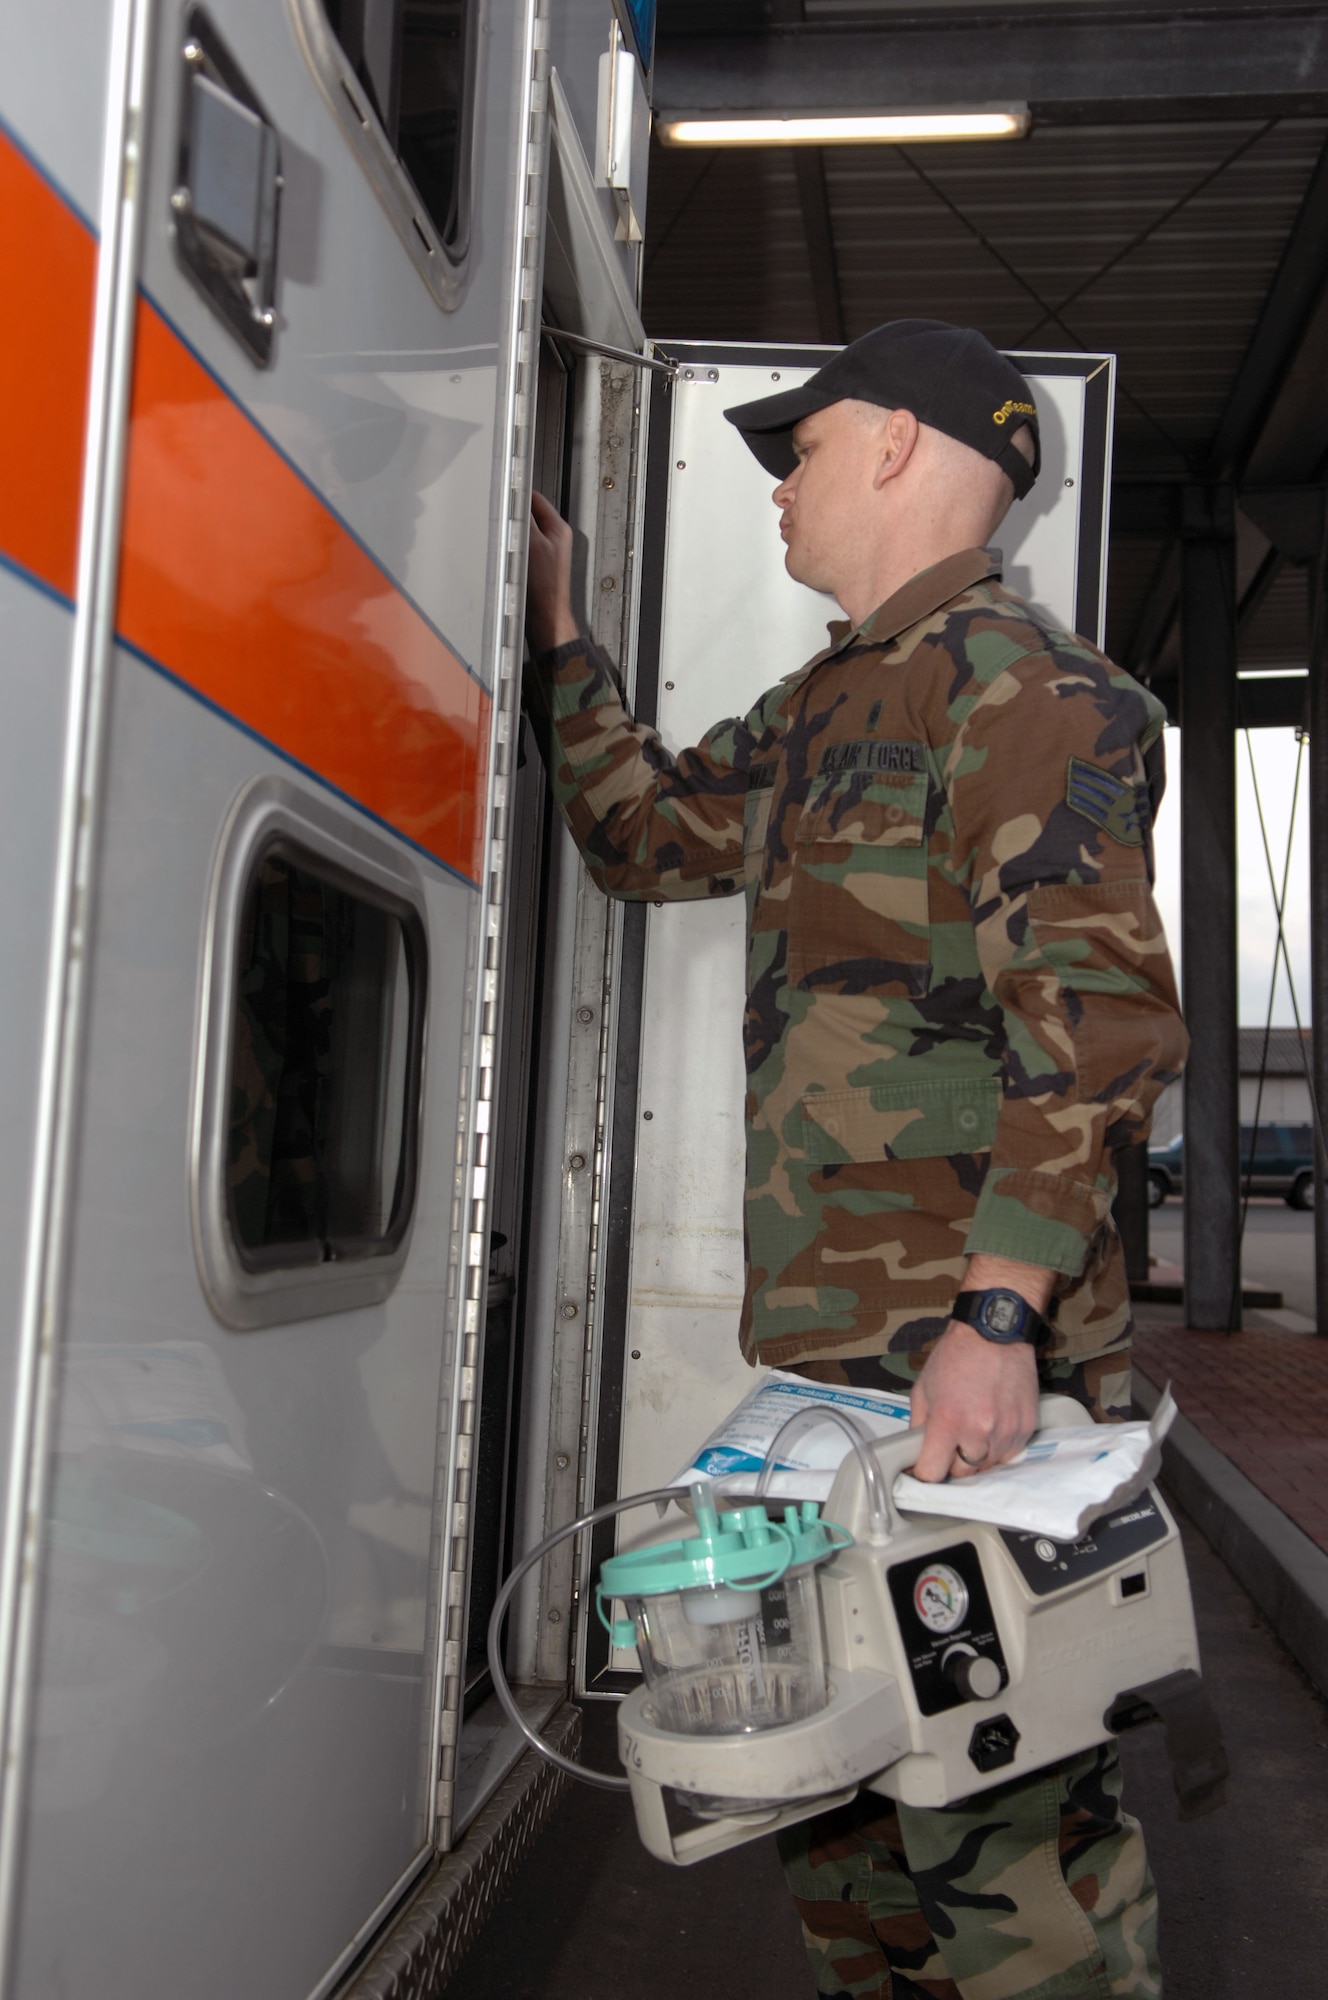 Senior Airman Wesley Arnold, a medic for the 435th Contingency Aeromedical Staging Facility, loads medical equipment into an ambulance before picking up a patient flown in from downrage Jan. 10. (U.S. Air Force photo/Senior Airman Megan Carrico)